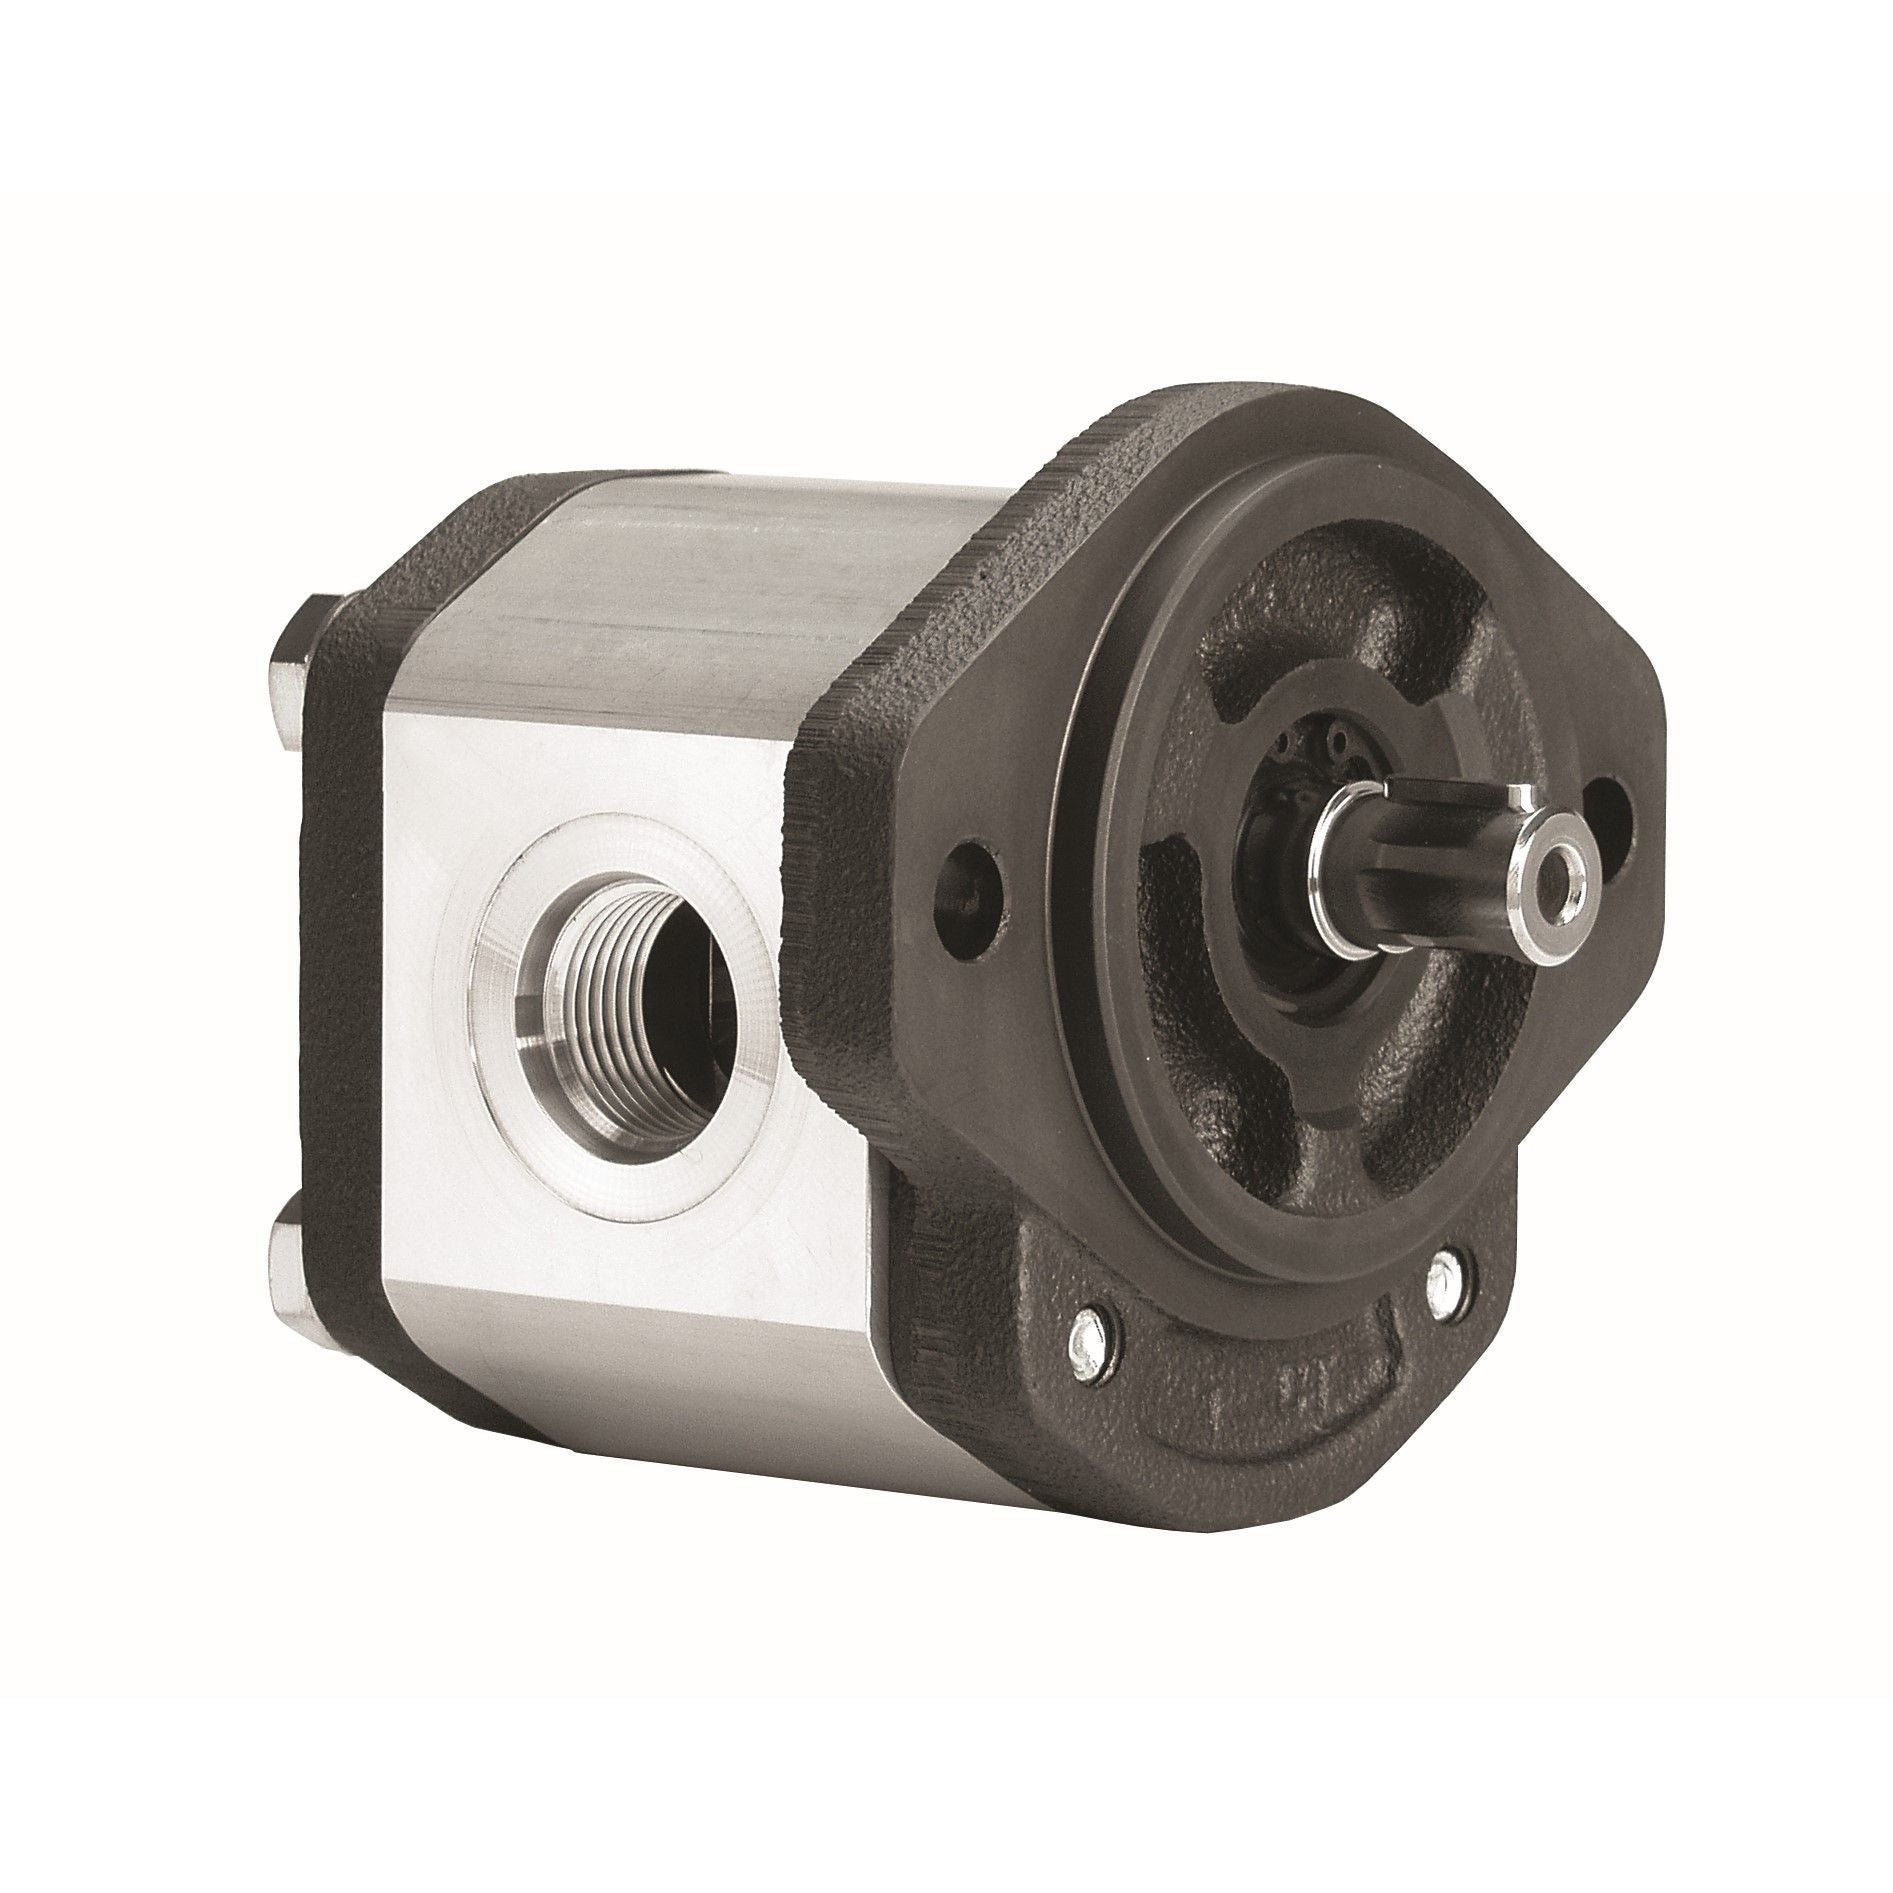 GHP1A-D-4 : Marzocchi Gear Pump, CW, 2.8cc (0.1708in3), 1.33 GPM, 3915psi, 5000 RPM, #8 SAE (1/2") In, #6 SAE (3/8") Out, Keyed Shaft 1/2" Bore x 1/8" Key, SAE AA 2-Bolt Mount